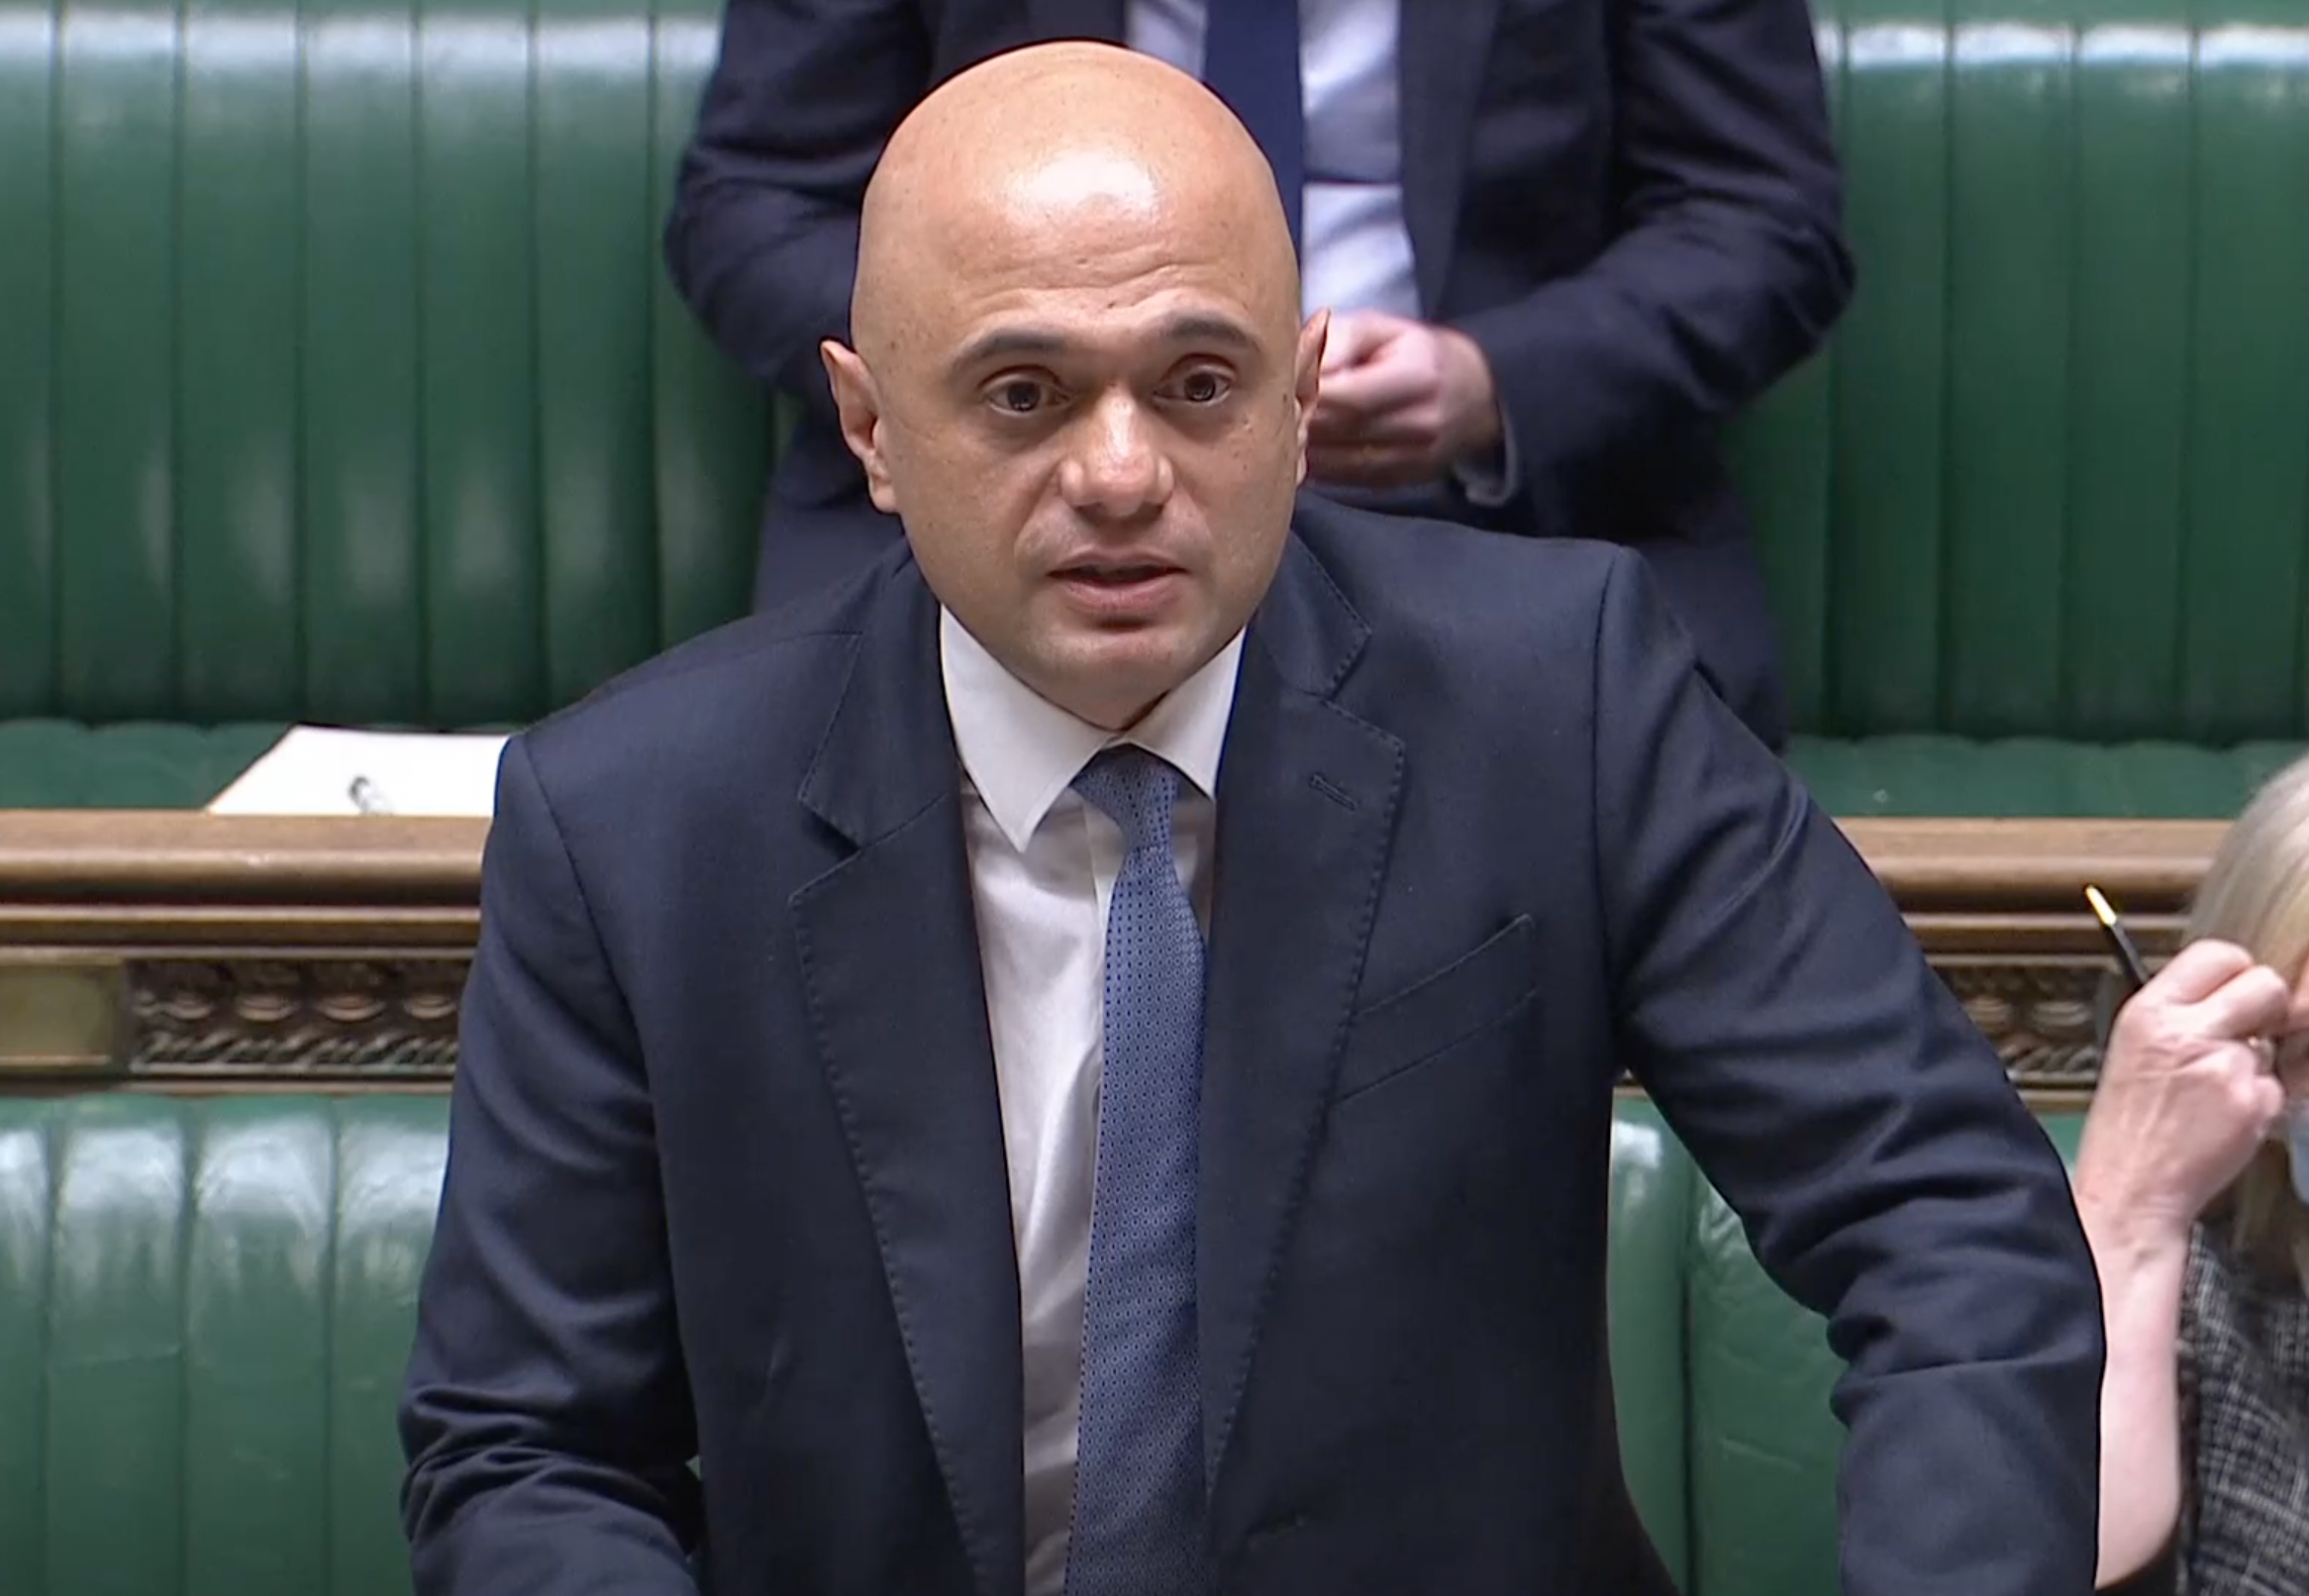 Health minister Sajid Javid giving a Covid-19 update to parliament